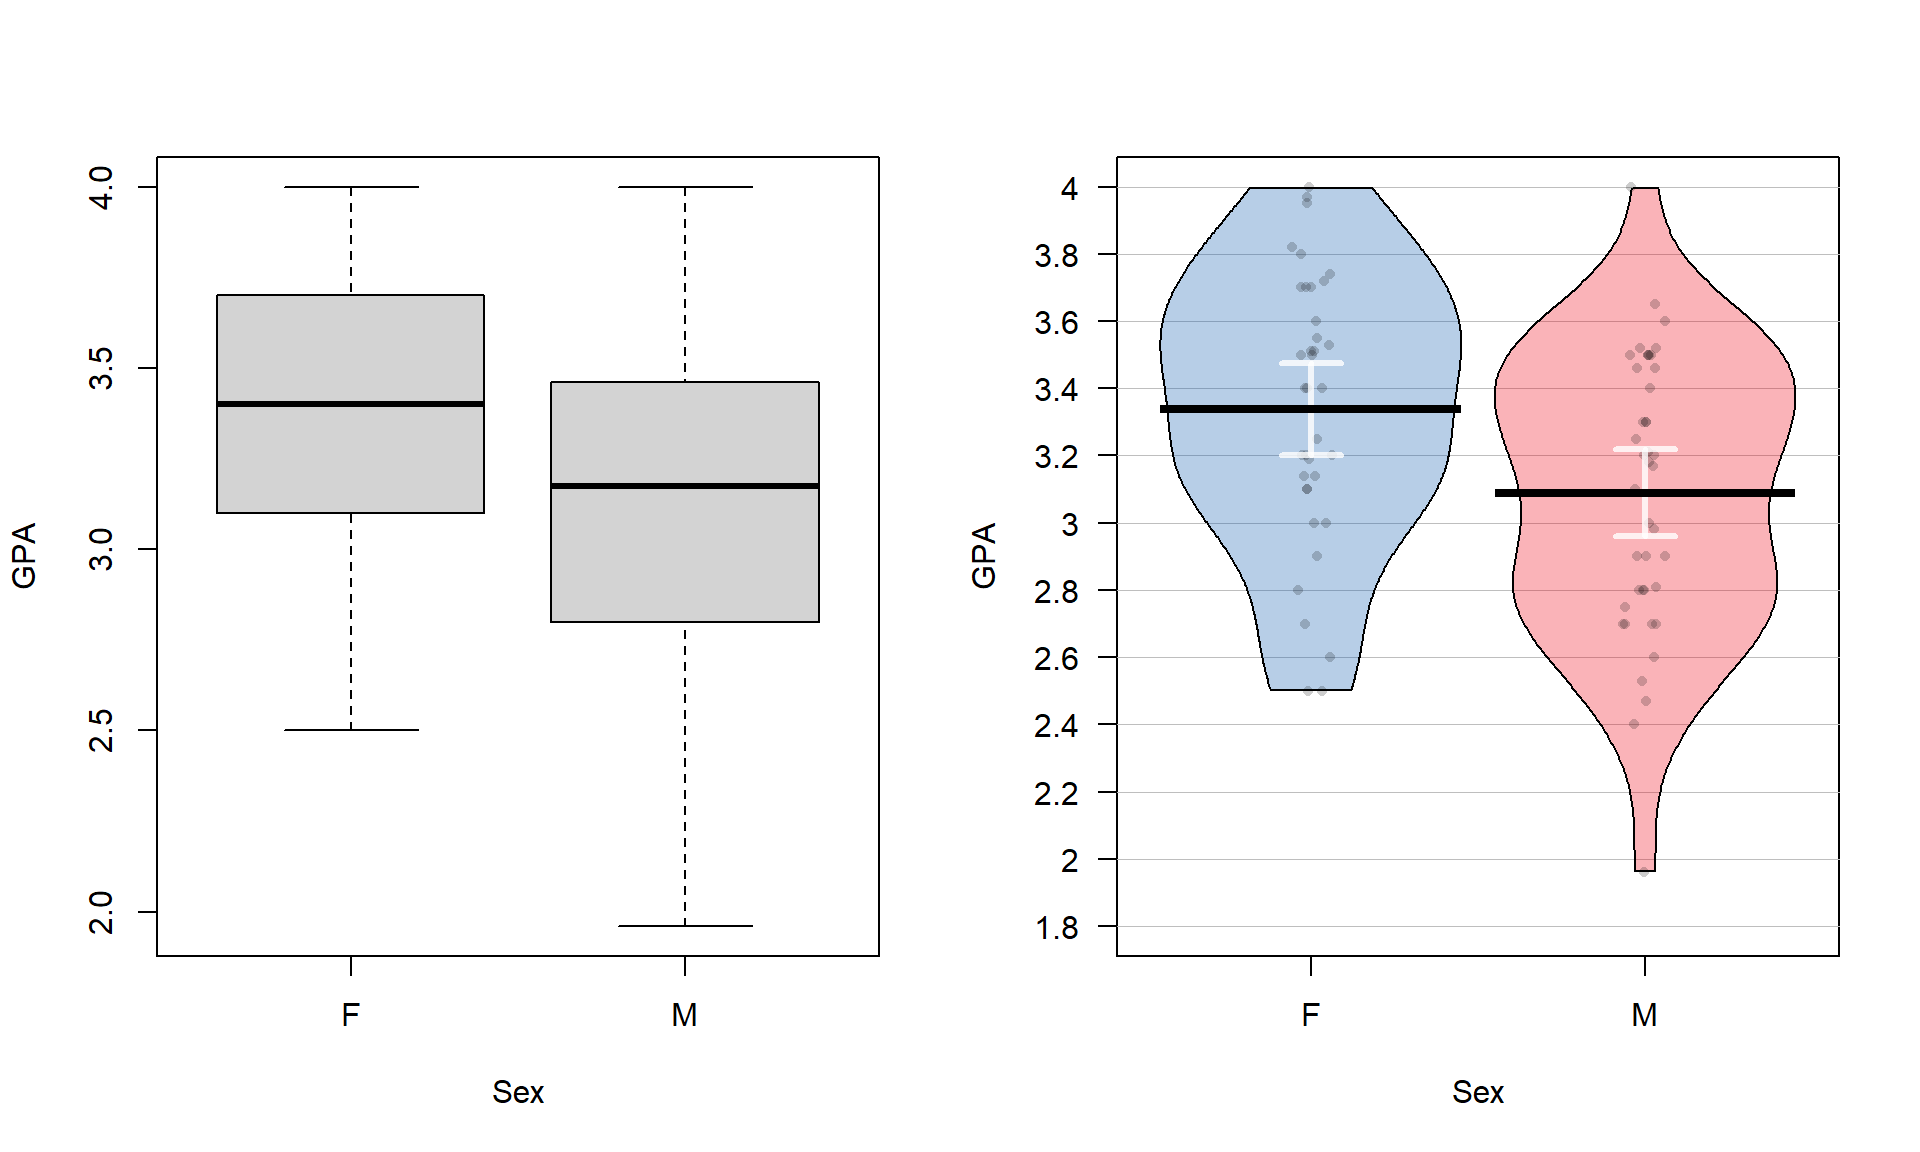 Side-by-side boxplot and pirate-plot of GPAs of Intermediate Statistics students by gender.